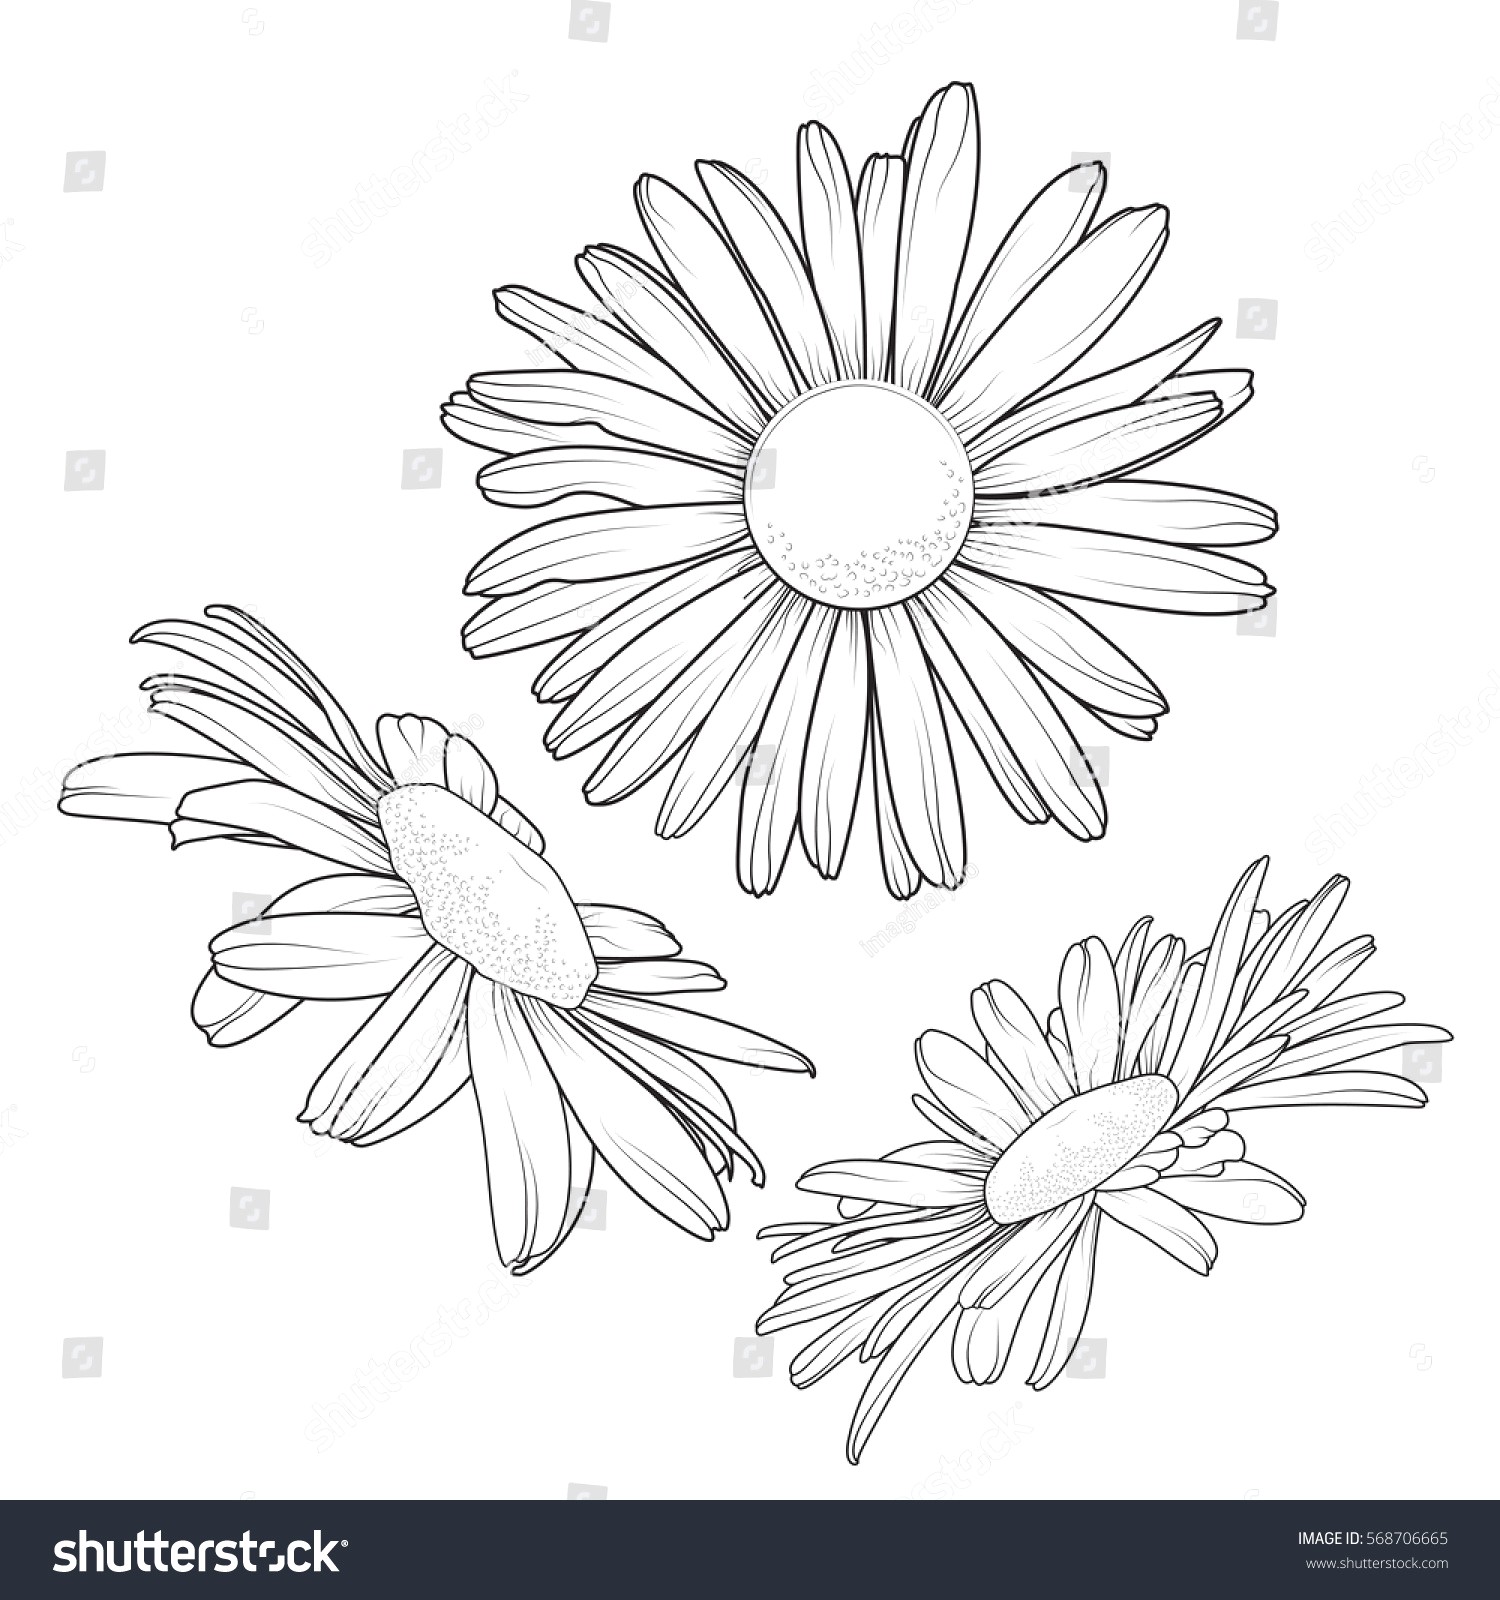 Drawing Of A Daisy Flower Sketch Library Throughout Outline - Daisy Drawing ...